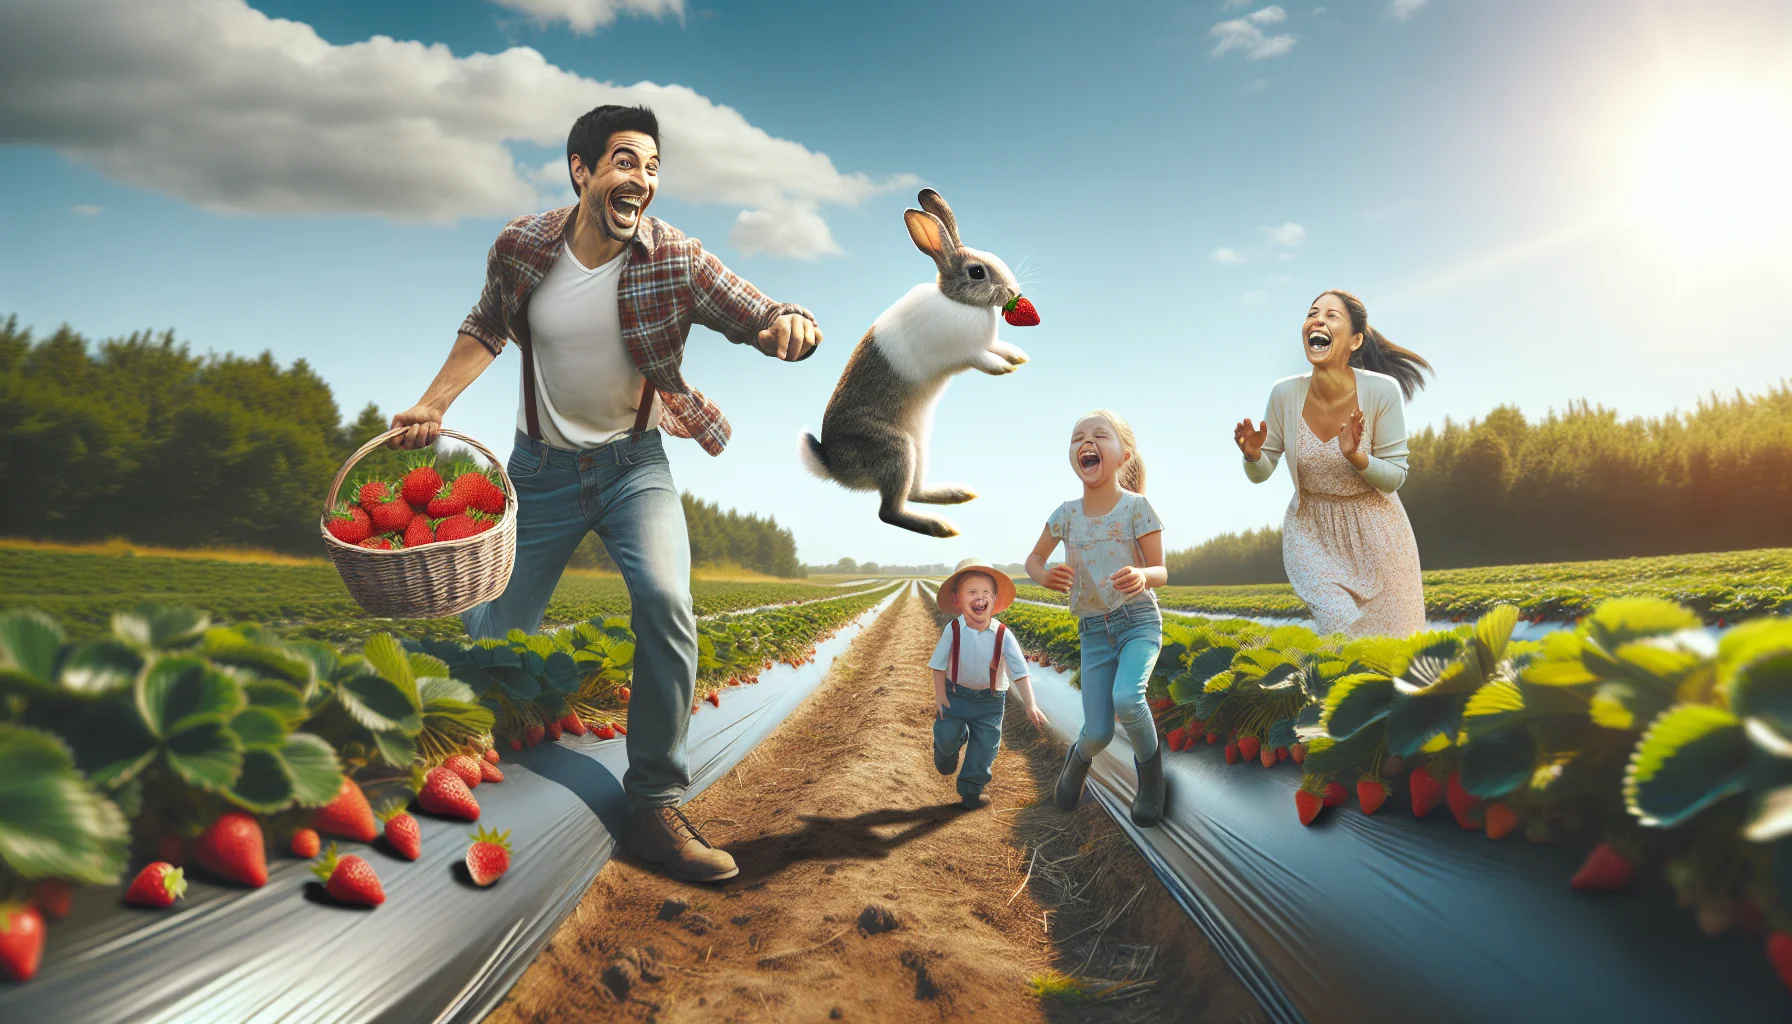 Imagine an amusing, realistic scene in a vast strawberry field, under the bright summer sun. A Hispanic man, clad in casual gardener's attire, is playfully chasing a mischievous bunny that has a strawberry in its mouth. Nearby, a Caucasian woman and a Middle-Eastern child laugh heartily as they watch this event unfold from their picking spot, with half-filled baskets of strawberries beside them. This lighthearted image inspires viewers to take joy in gardening and aspire for the delightful moments it offers.